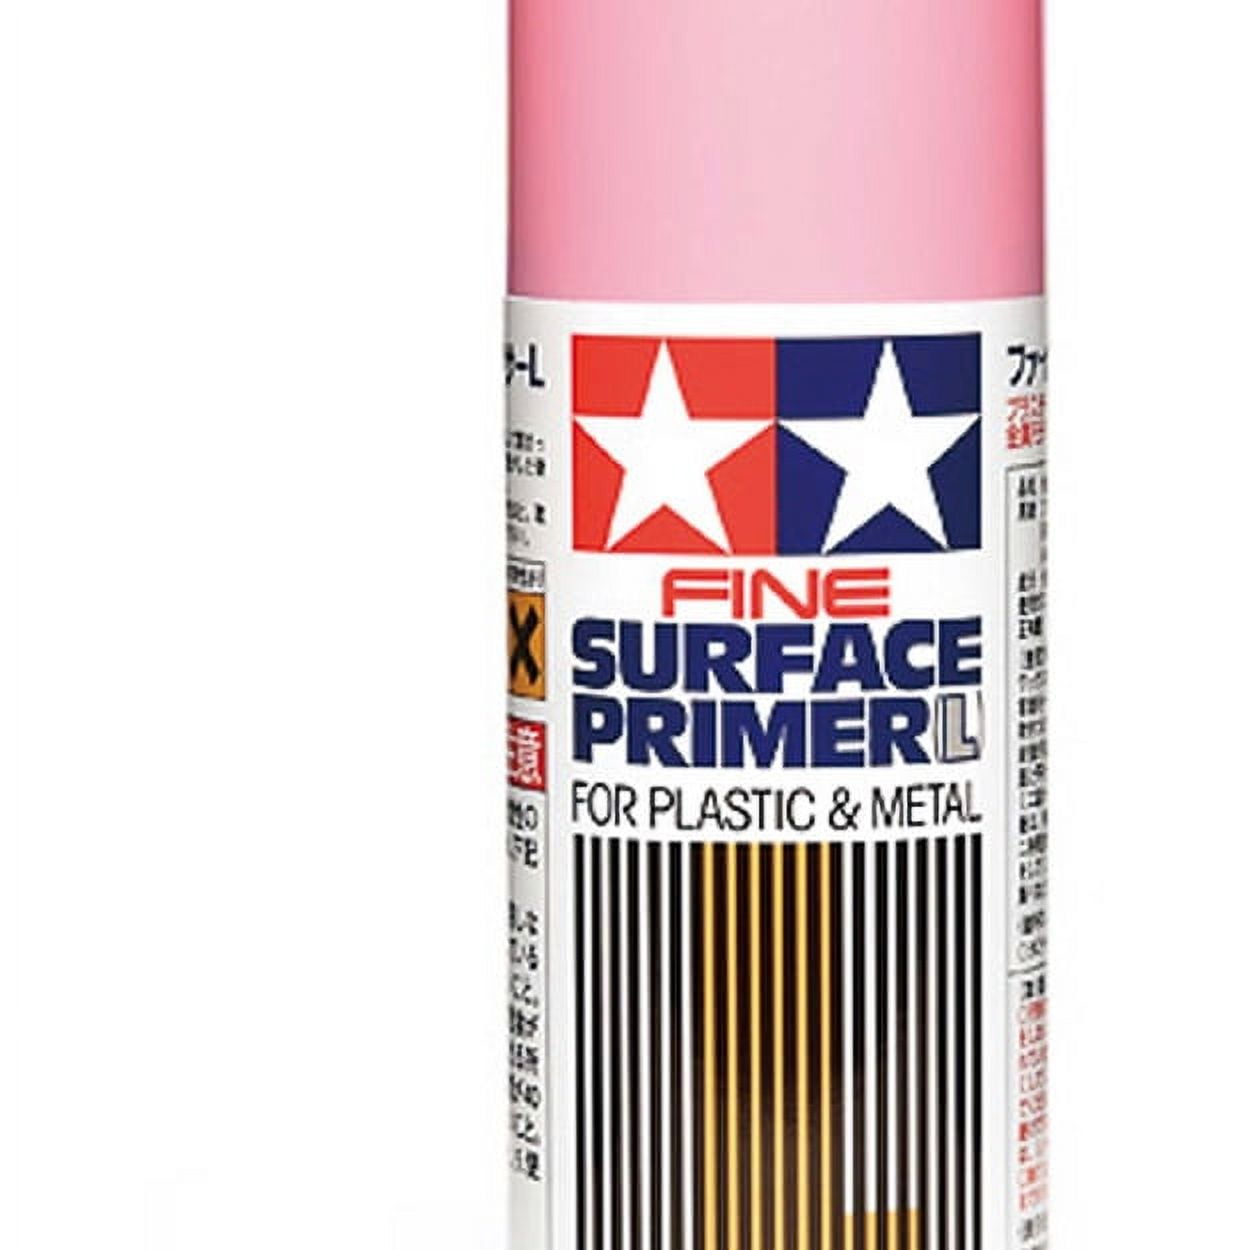 The Army Painter Color Primer Spray Paint, Daemonic Yellow, 400ml, 13.5oz -  Acrylic Spray Undercoat for Miniature Painting - Spray Primer for Plastic